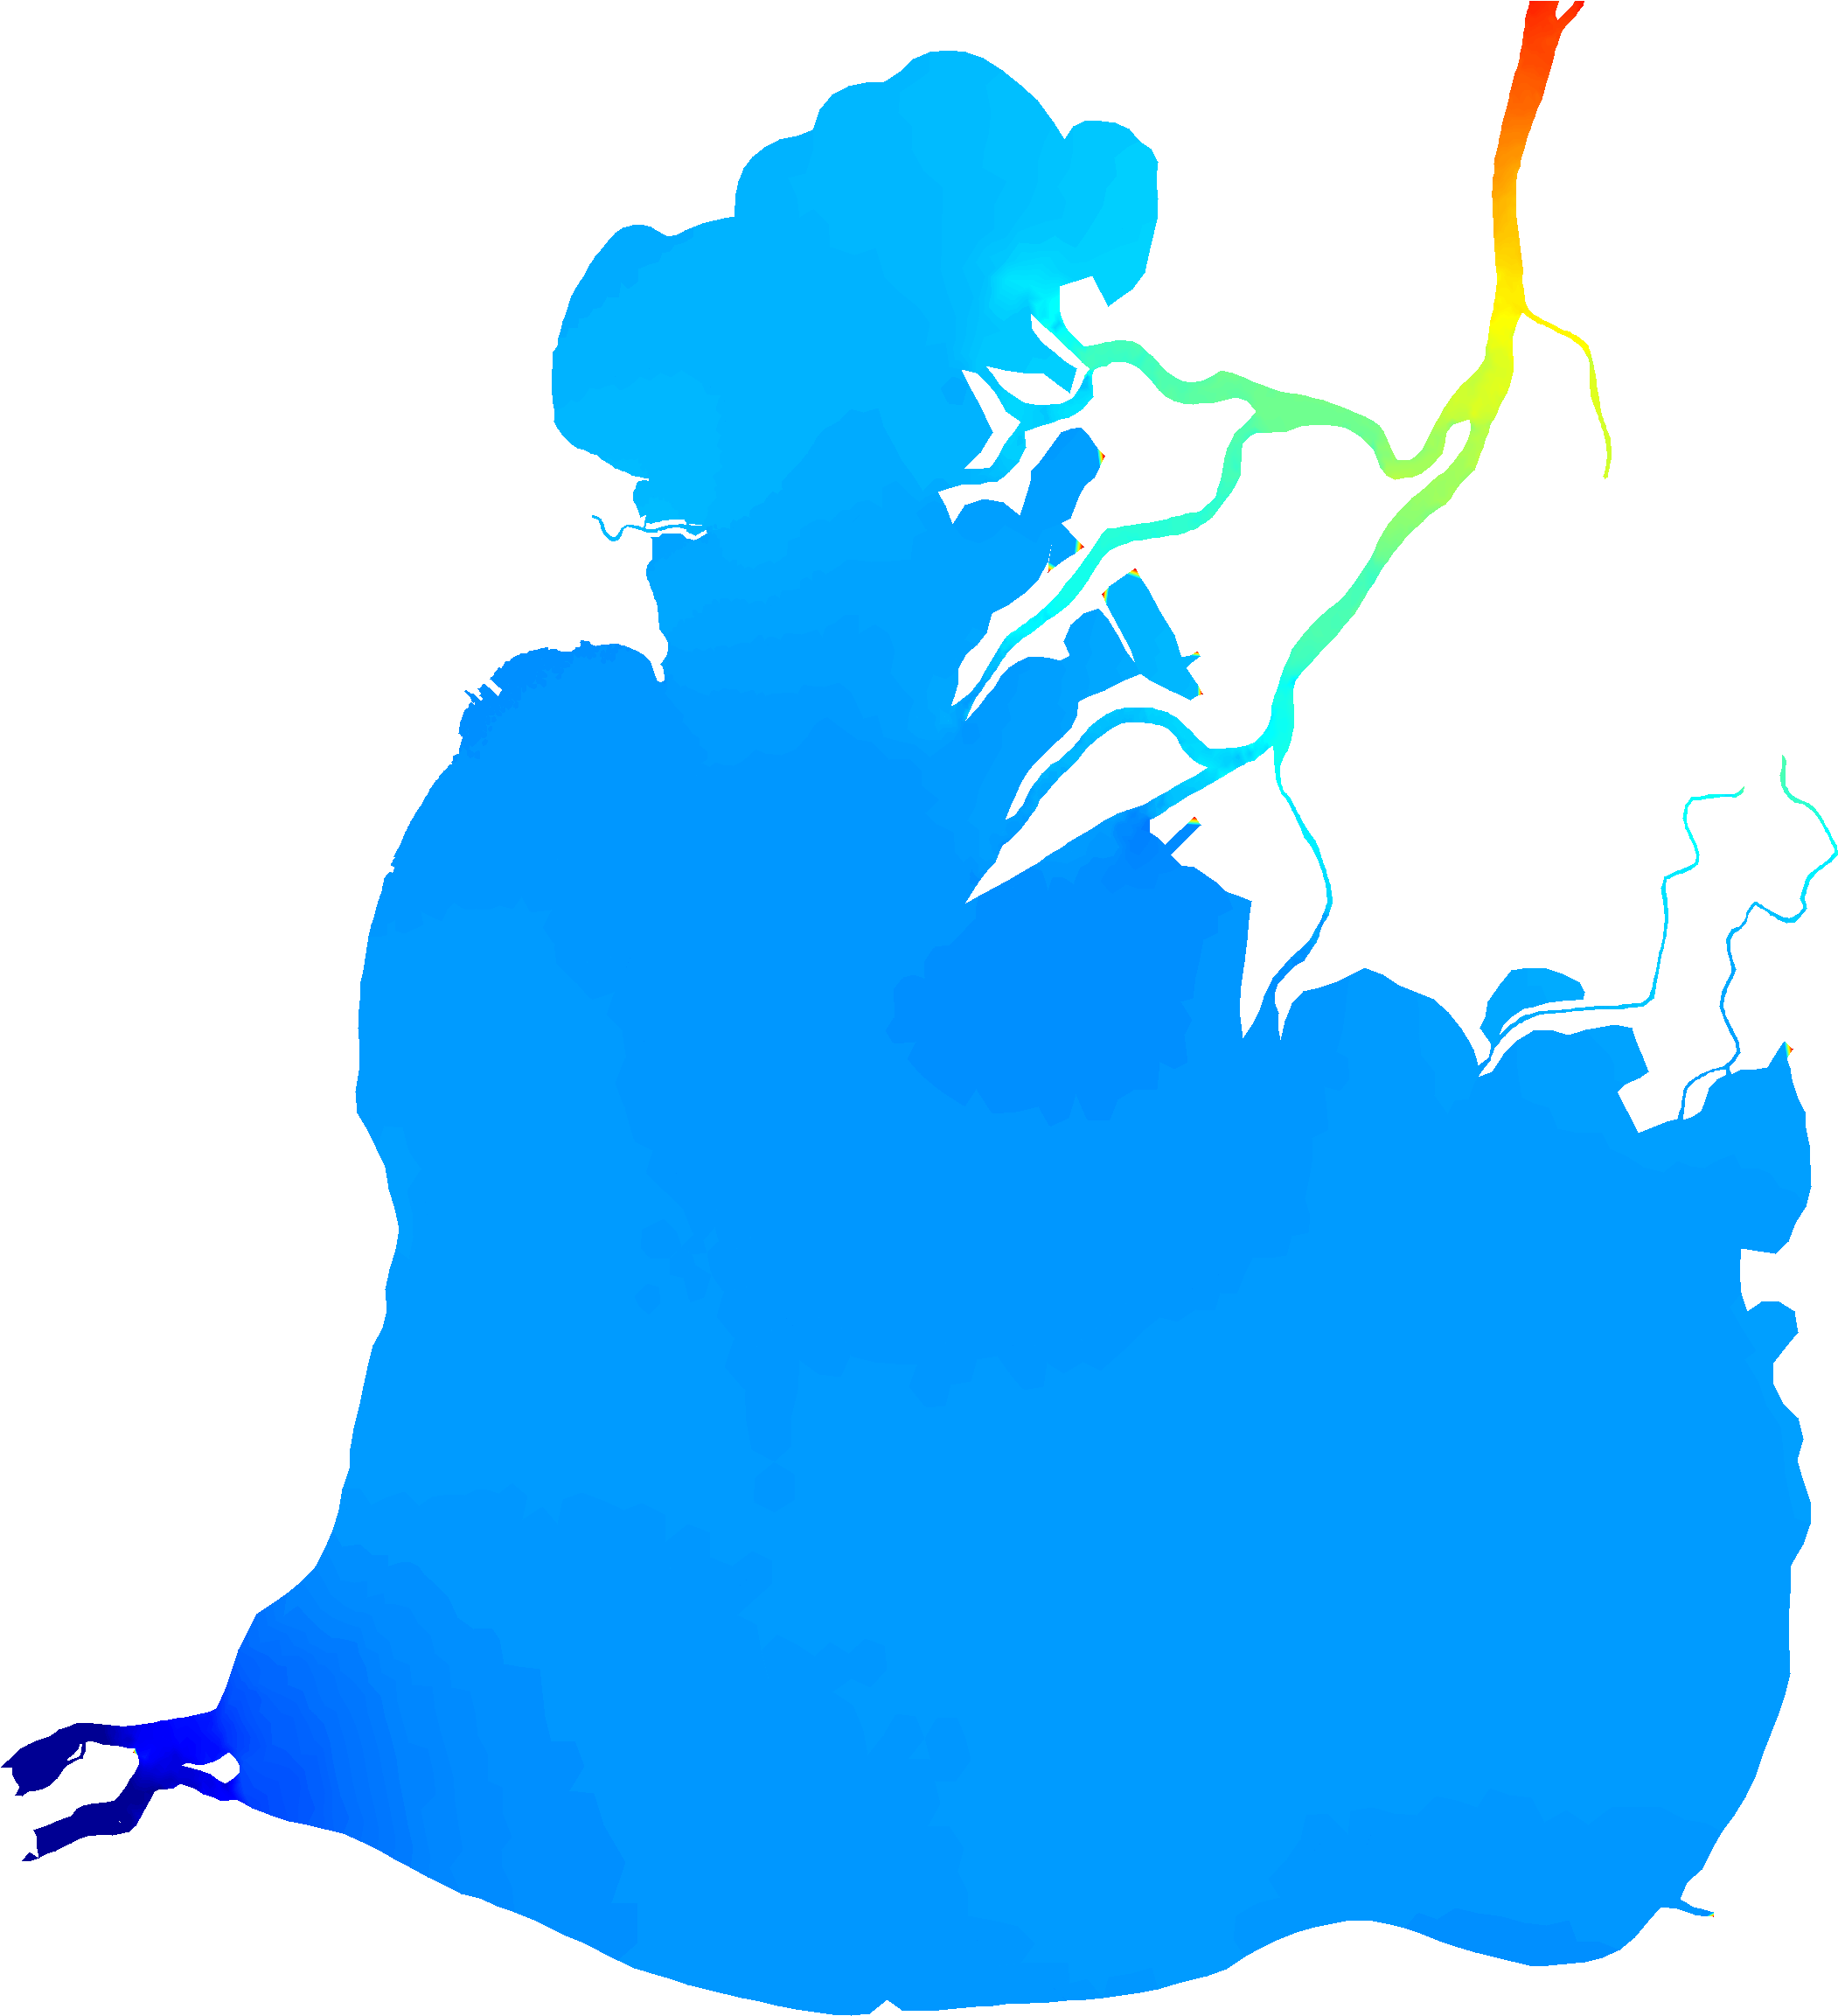 Abstract Lakeand River System Map